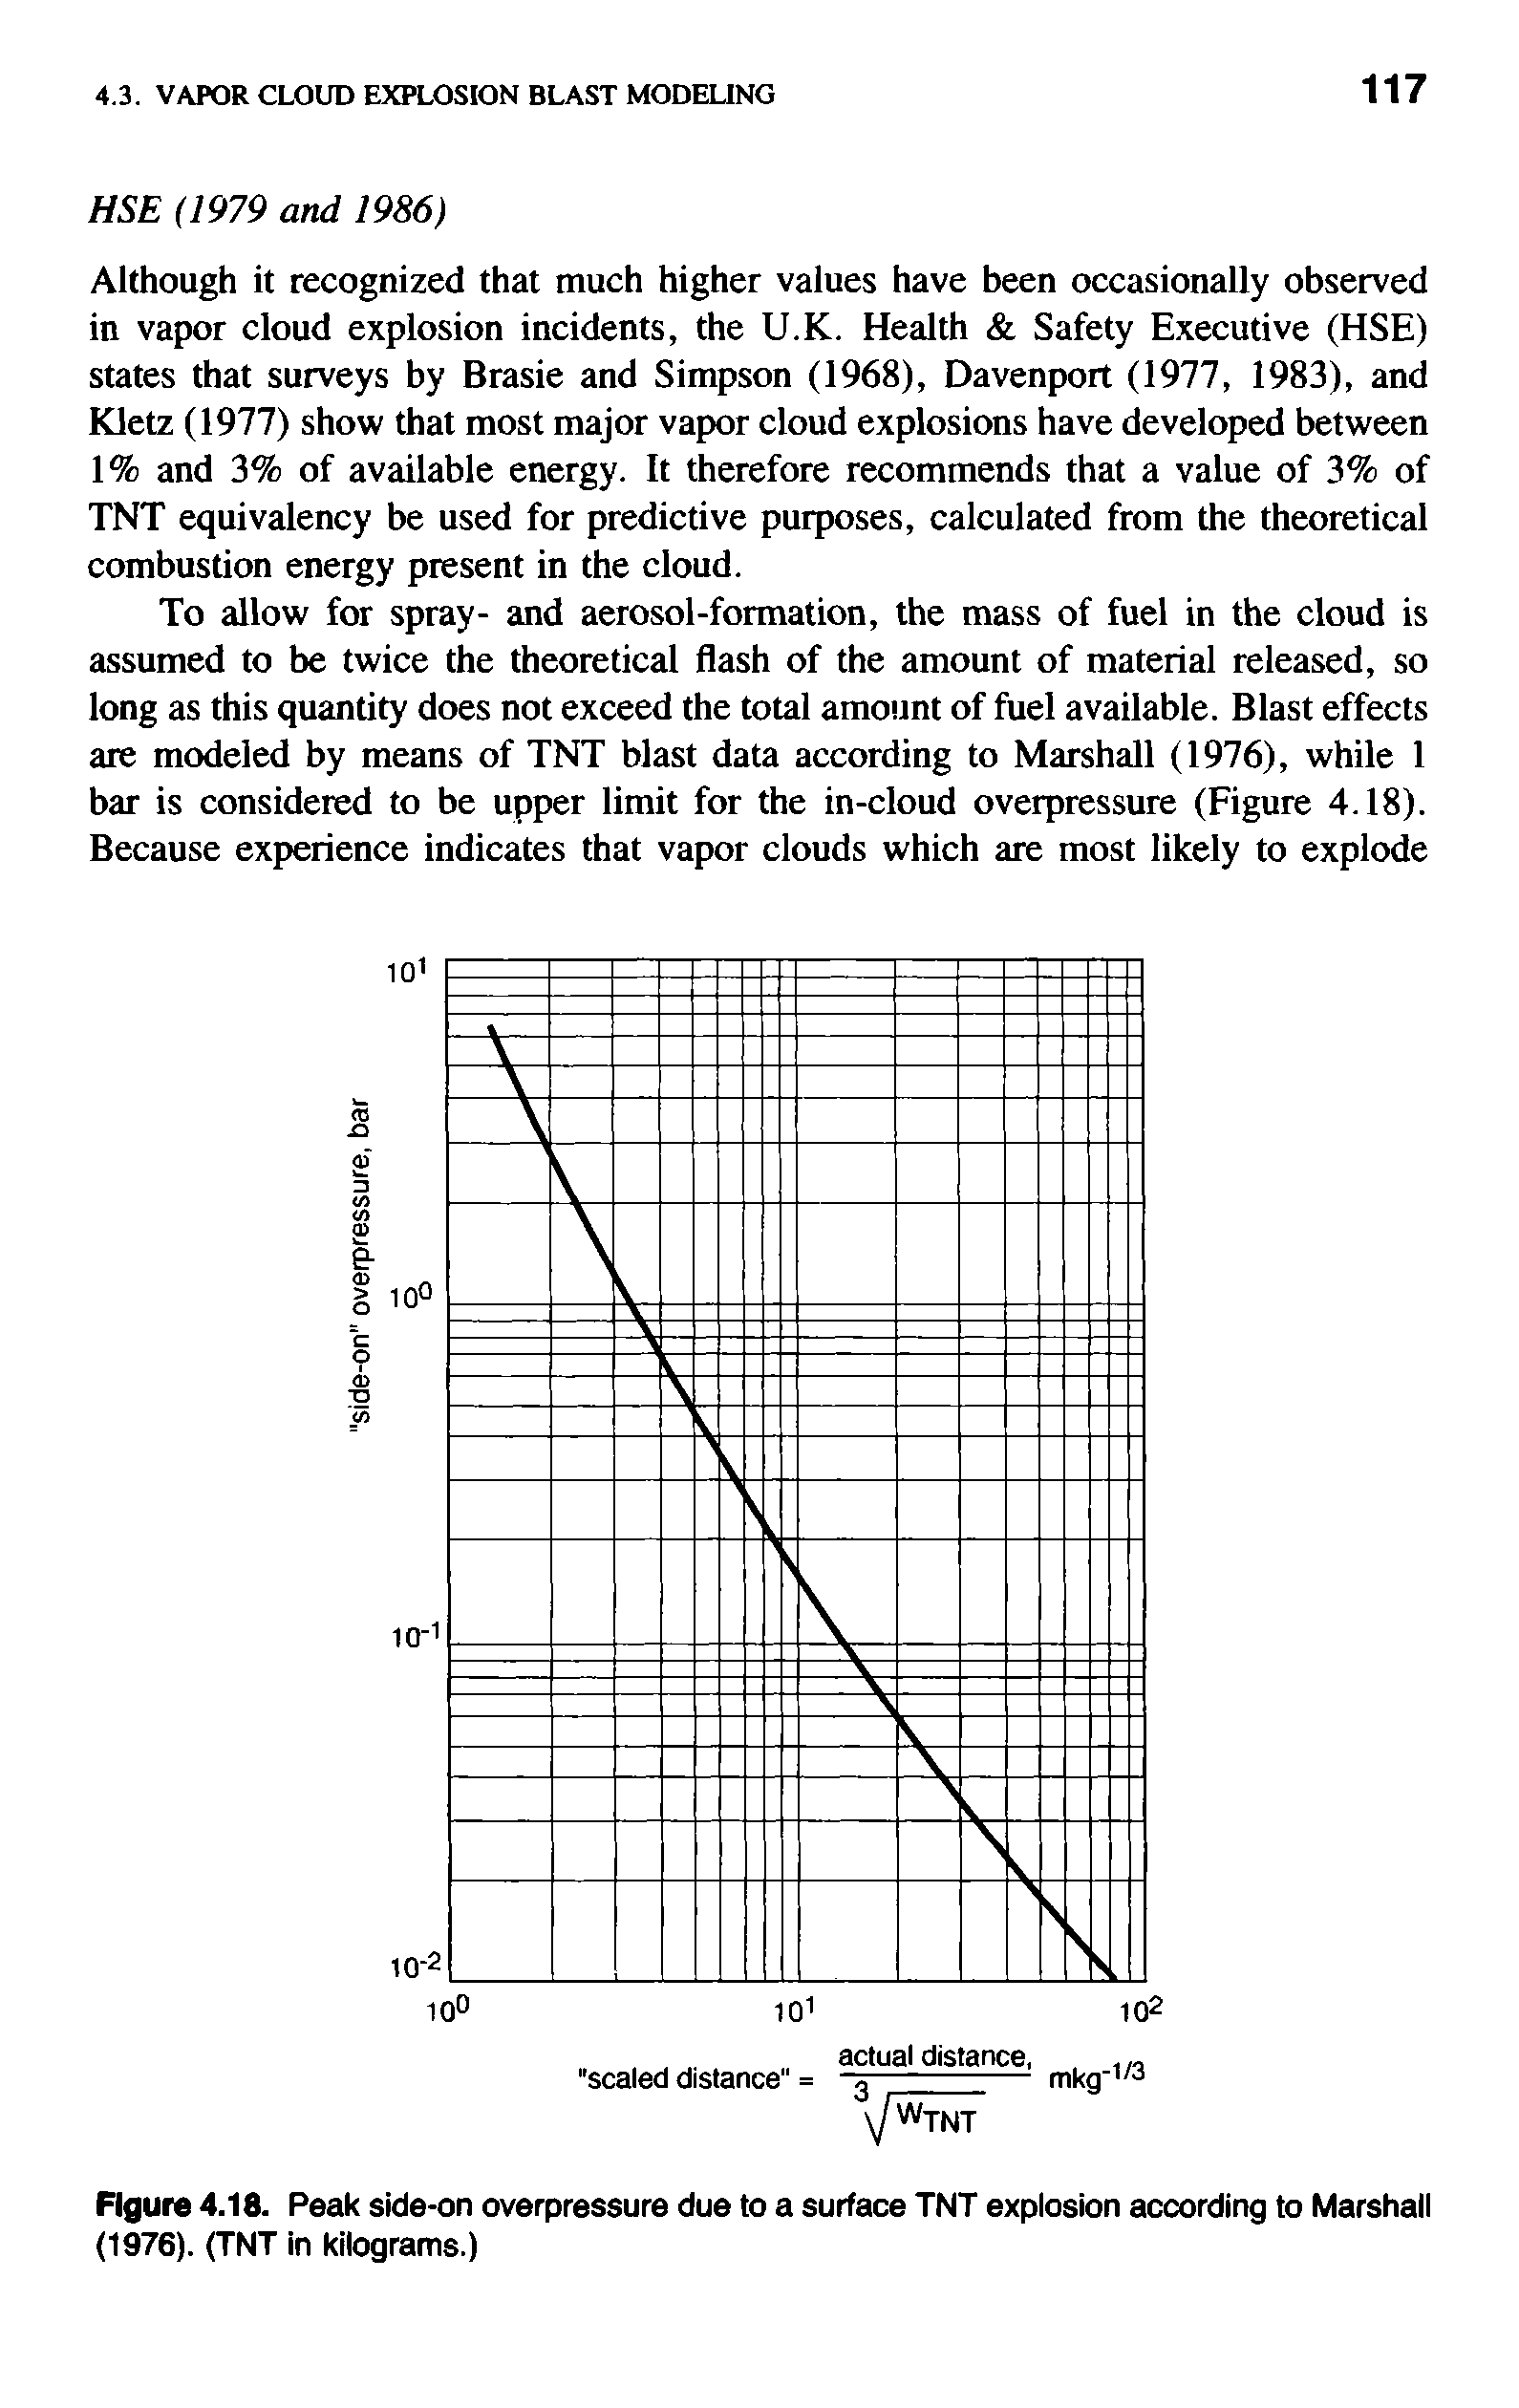 Figure 4.18. Peak side-on overpressure due to a surface TNT explosion according to Marshall (1976). (TNT in kilograms.)...